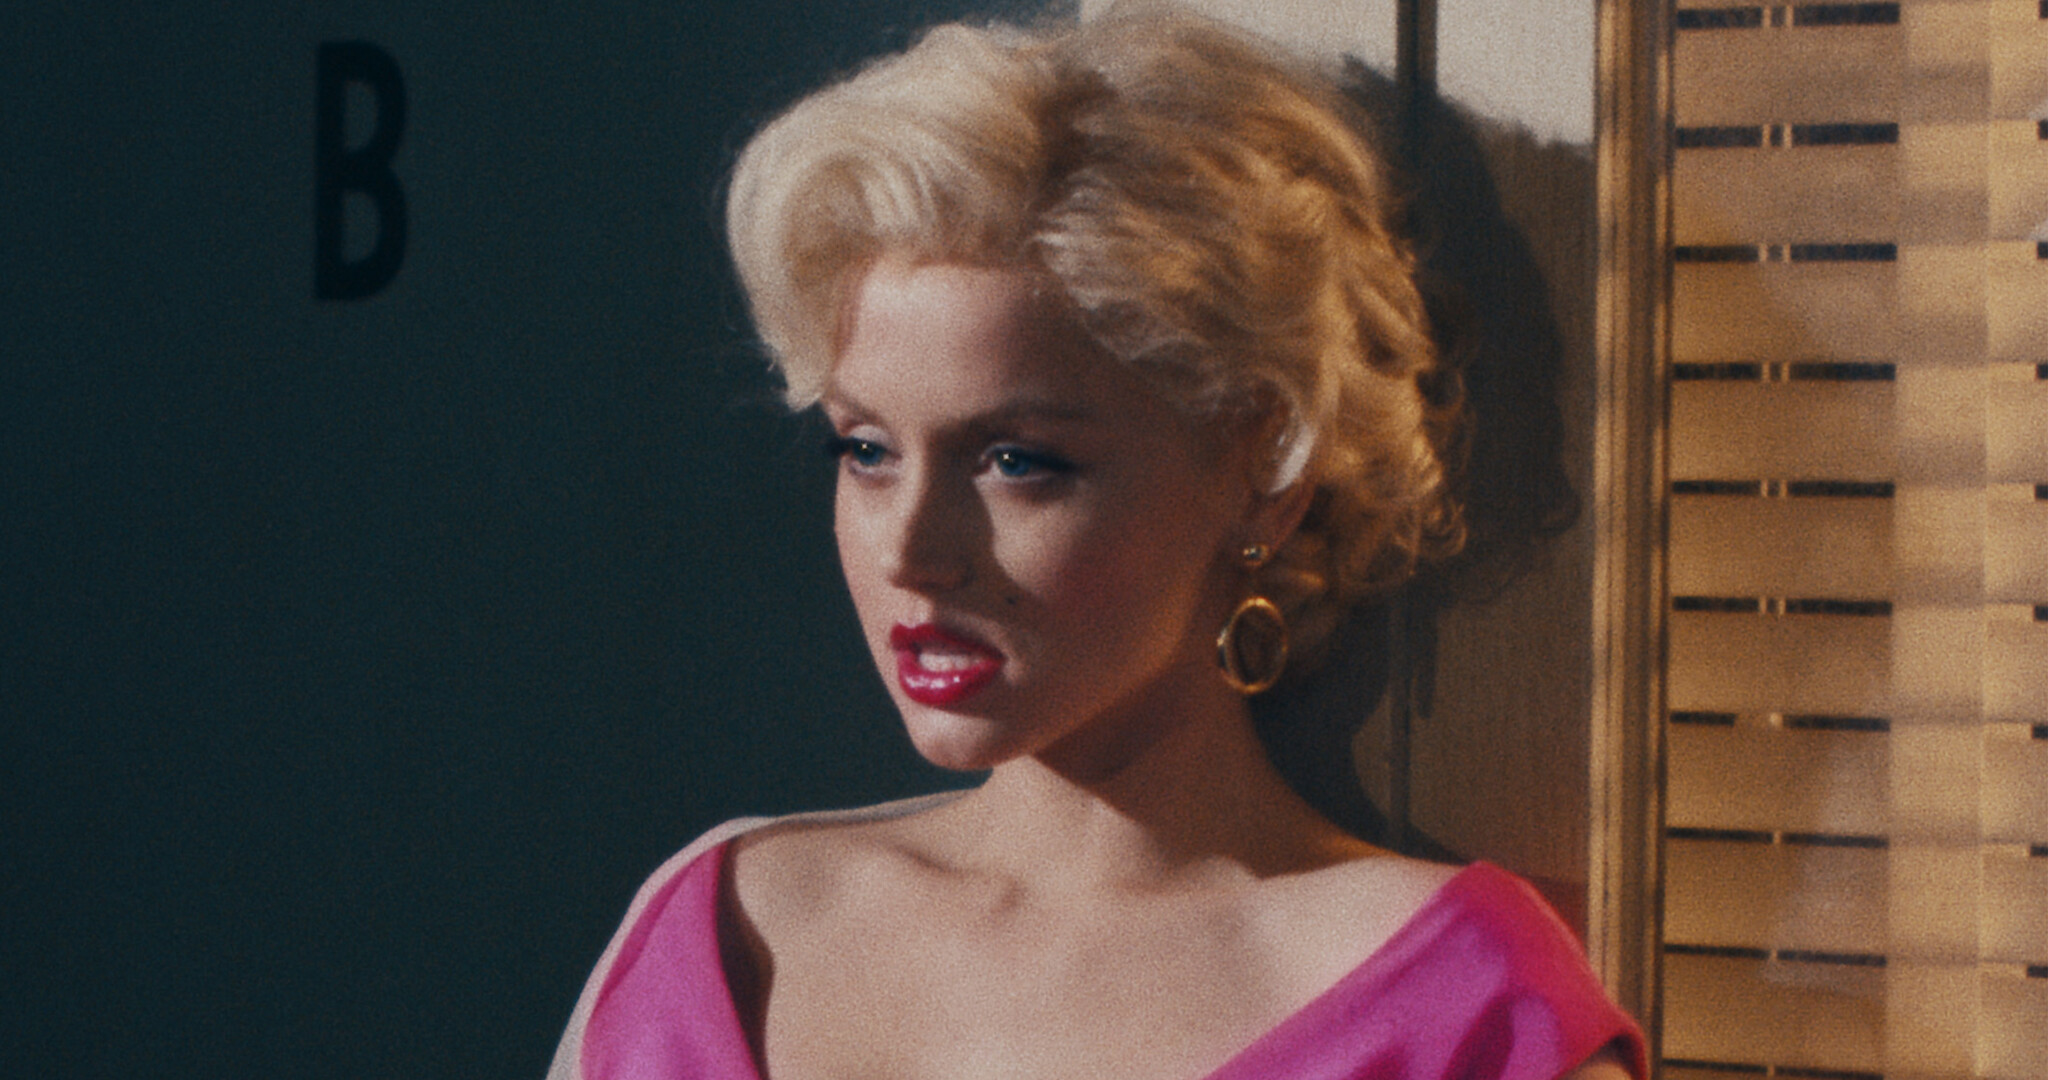 Who Stars In Blonde Marilyn Monroe Movie With Ana de Armas? photo